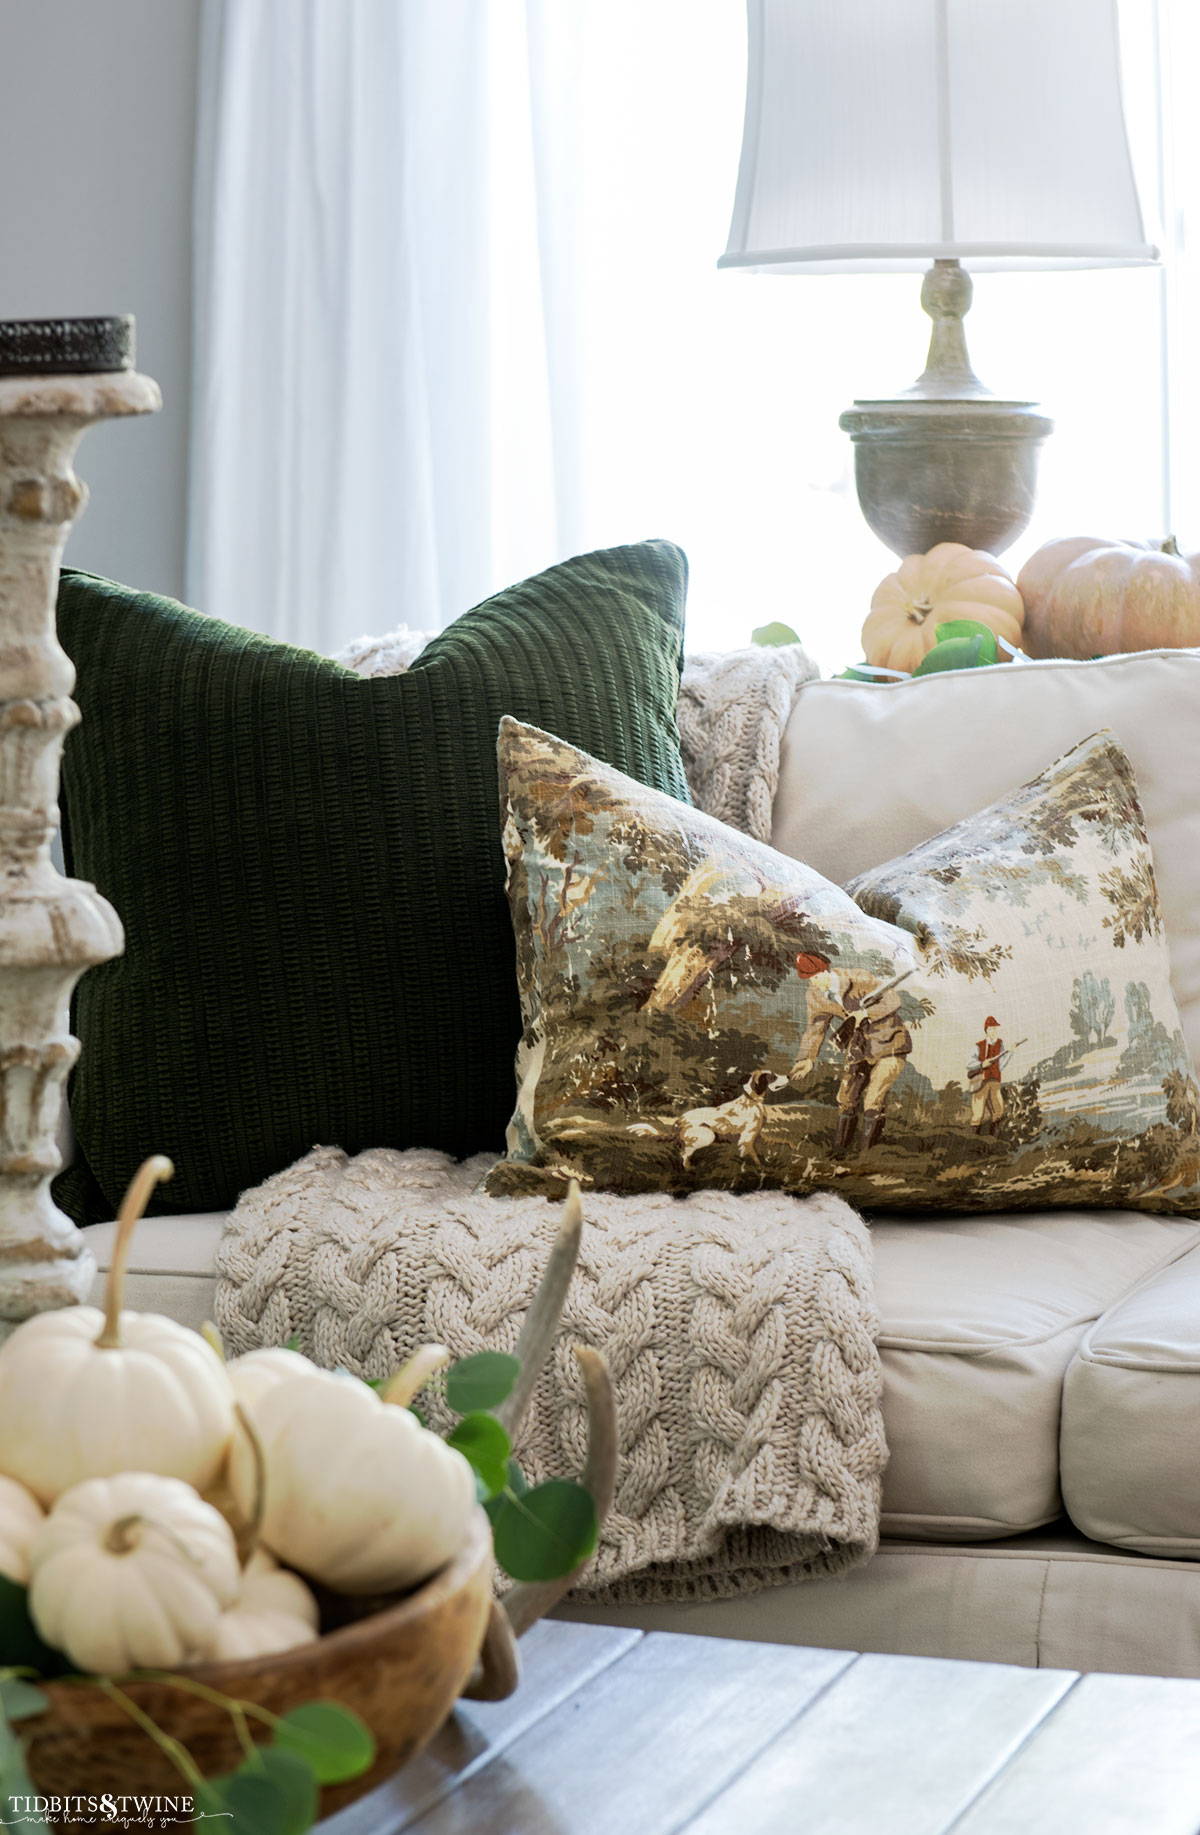 sofa styled with green fall pillows and knit throw and coffee table in front holding bowl of white pumpkins